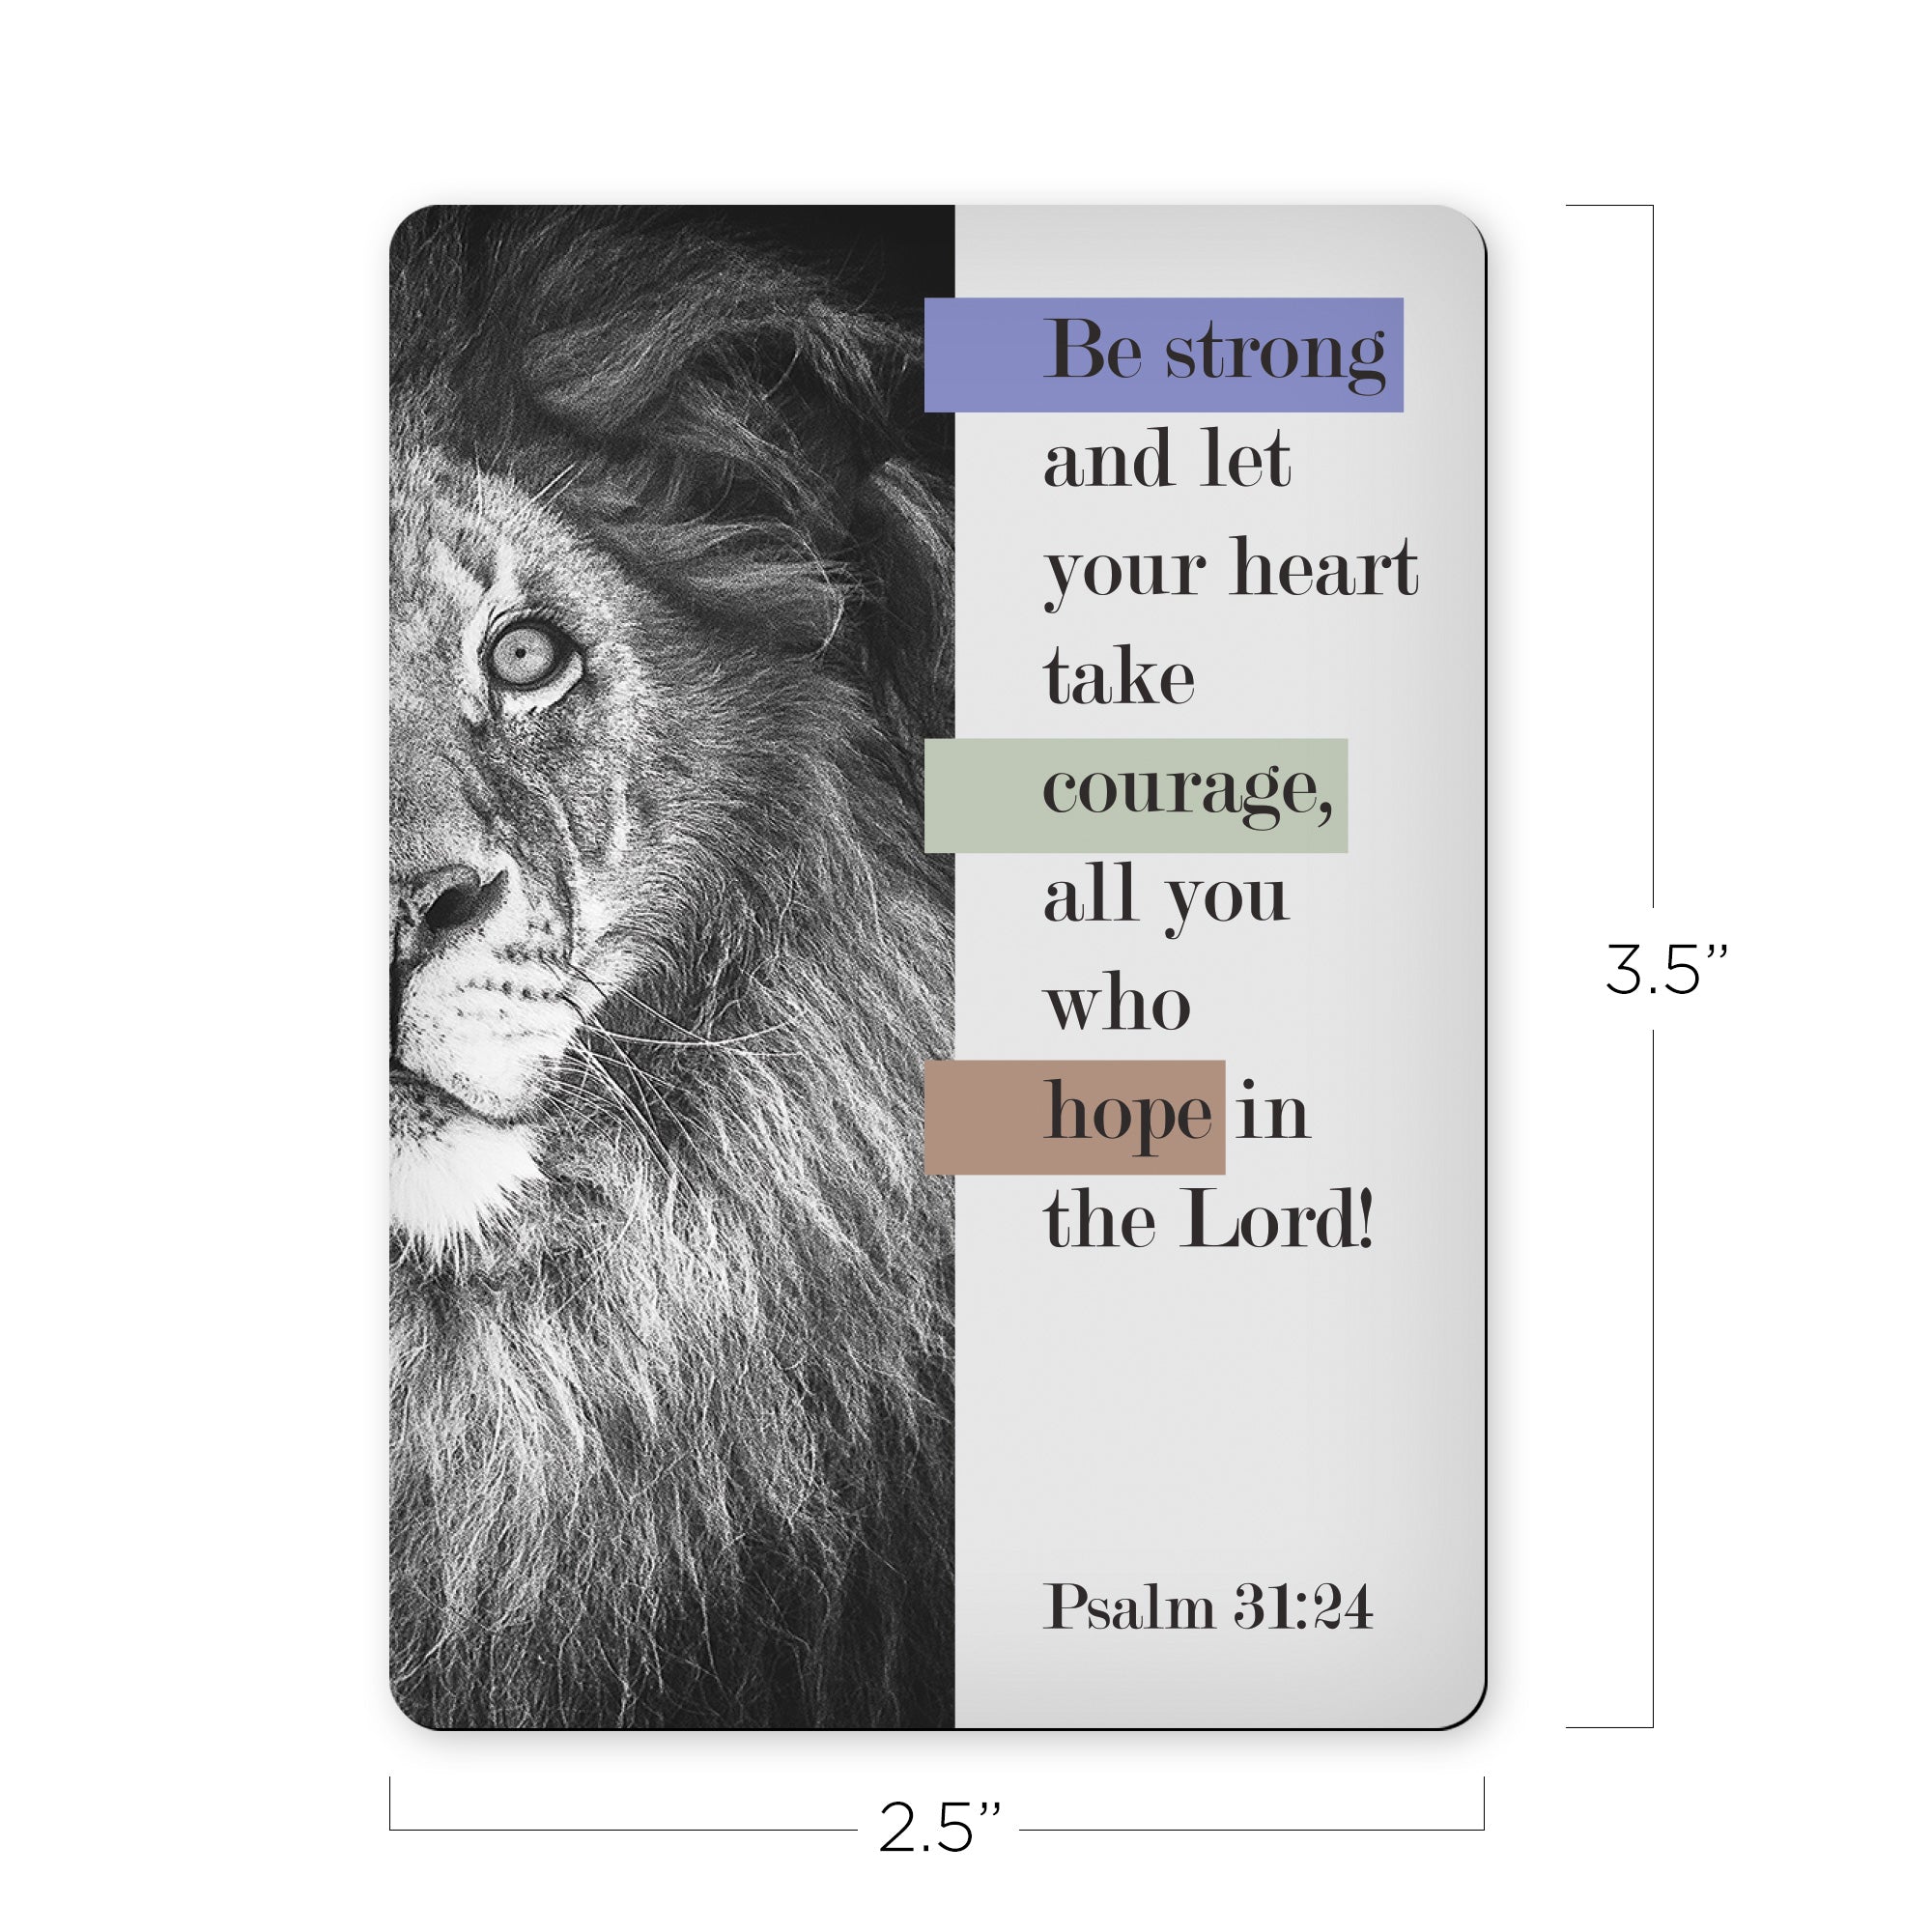 Be strong - Psalm 31:24 - Scripture Magnet